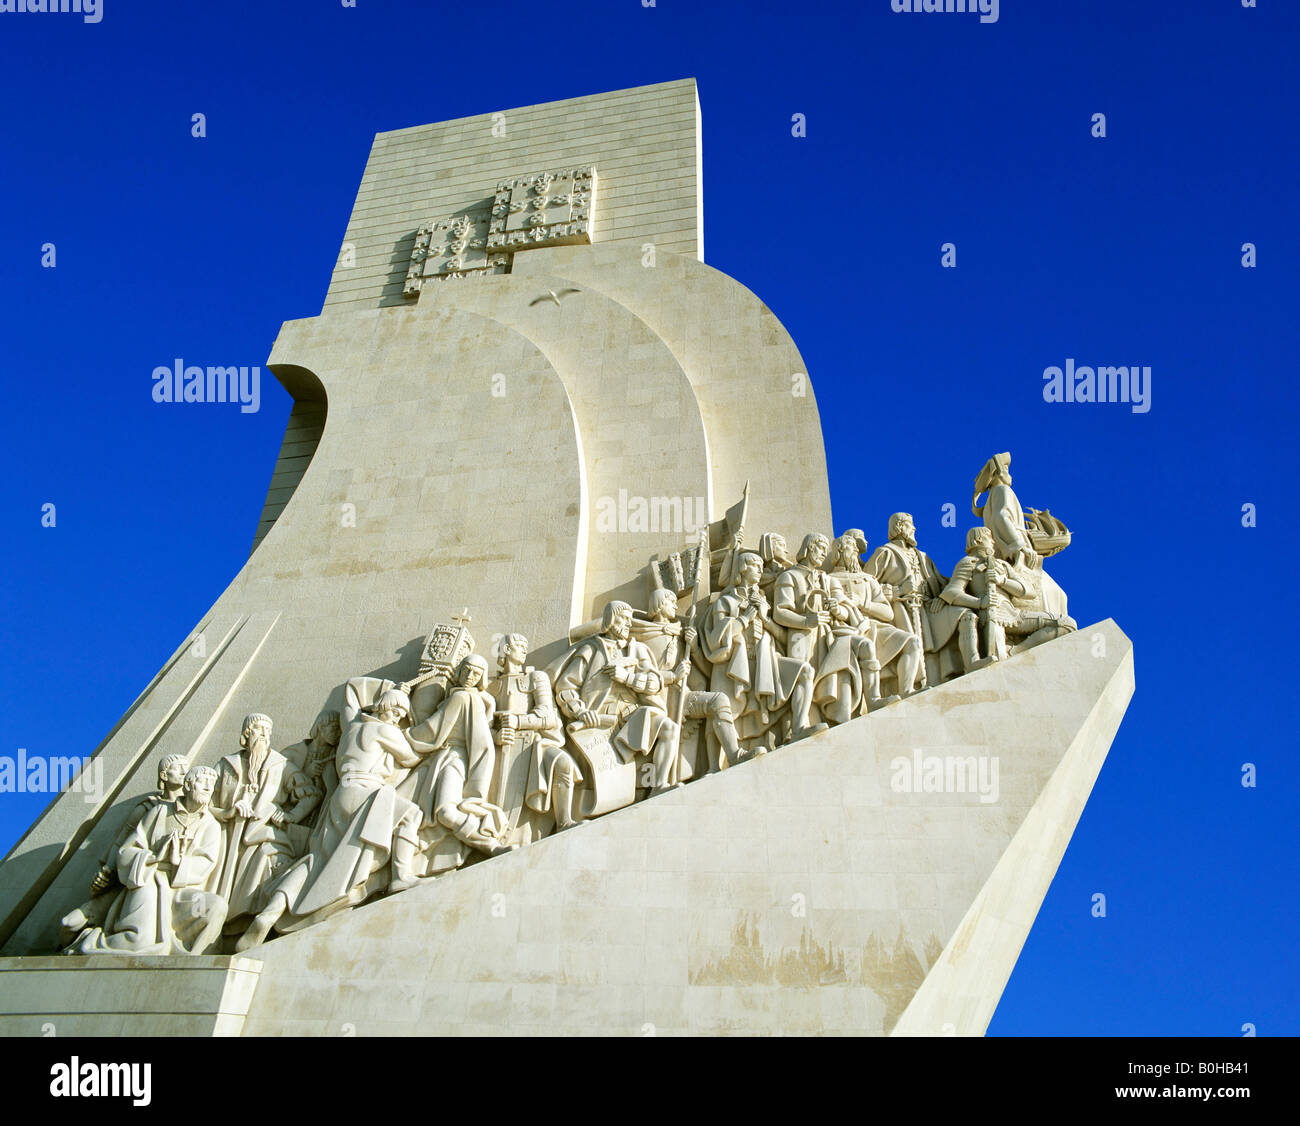 Padrao dos Descobrimentos, seafaring memorial, age of discovery, Belem on the Tagus River, Lisbon, Portugal Stock Photo